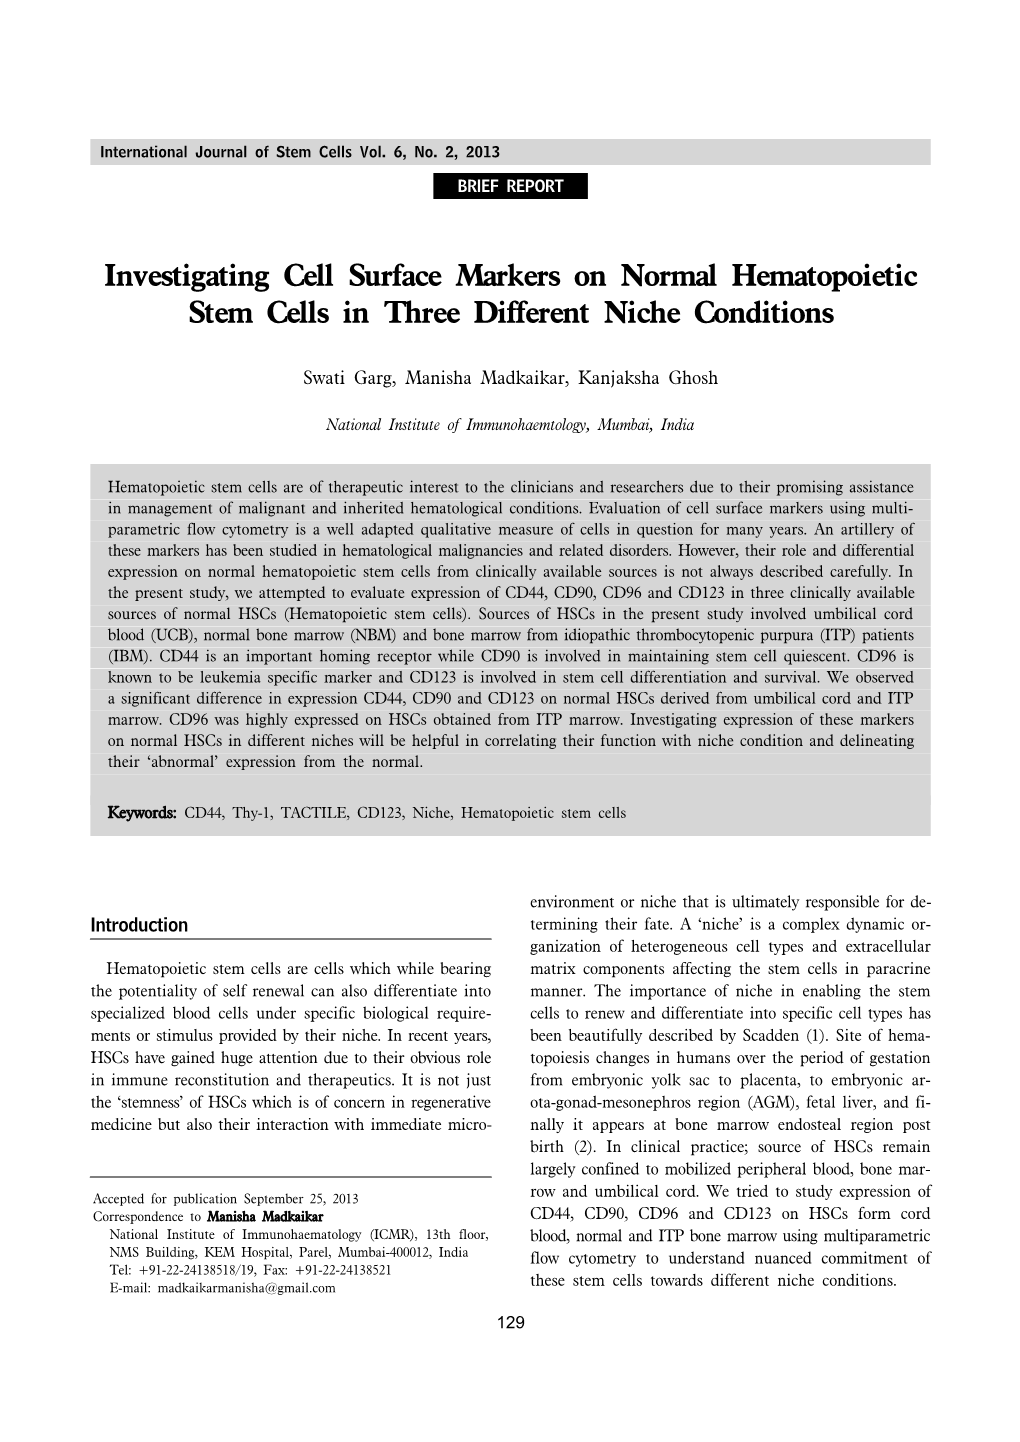 Investigating Cell Surface Markers on Normal Hematopoietic Stem Cells in Three Different Niche Conditions